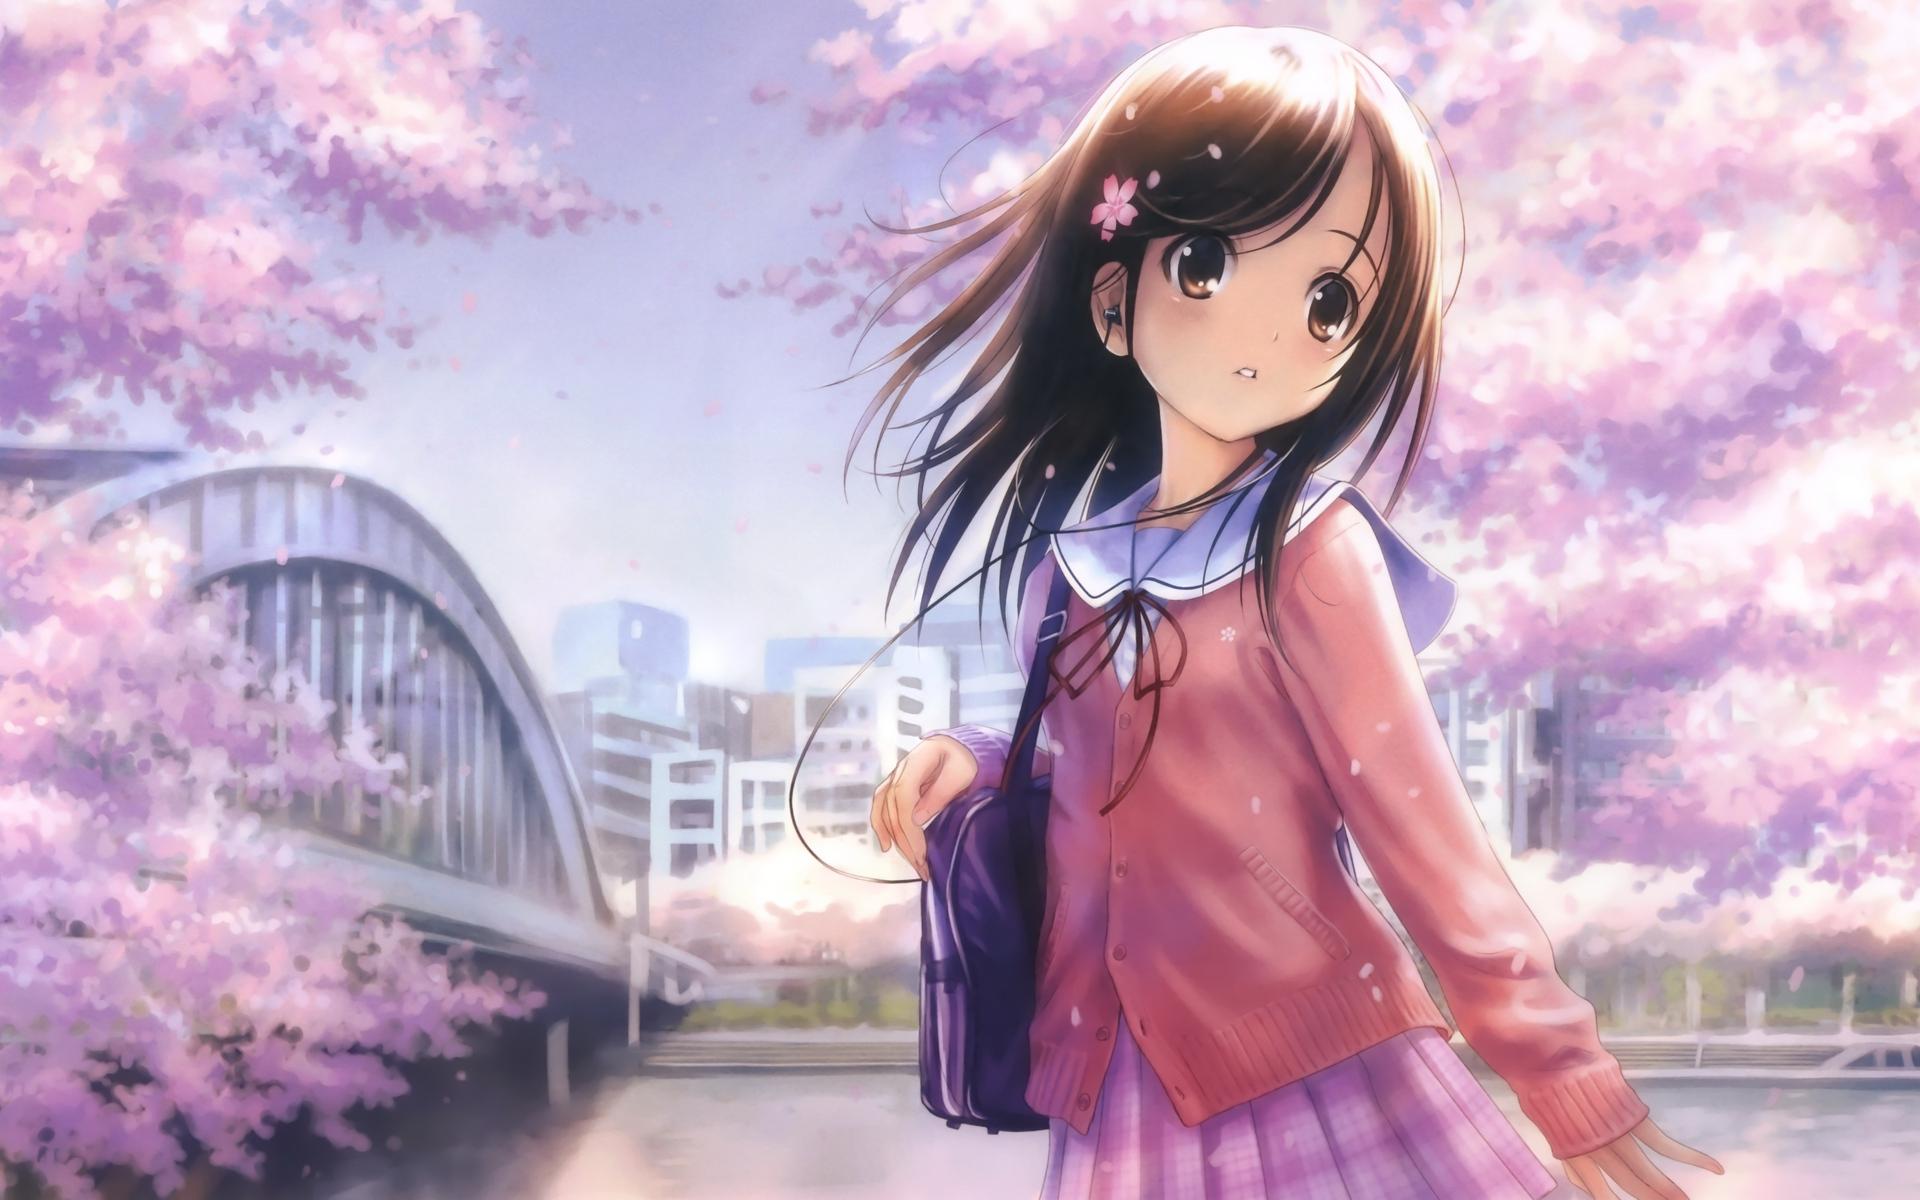 Anime Girl Background Images, HD Pictures and Wallpaper For Free Download